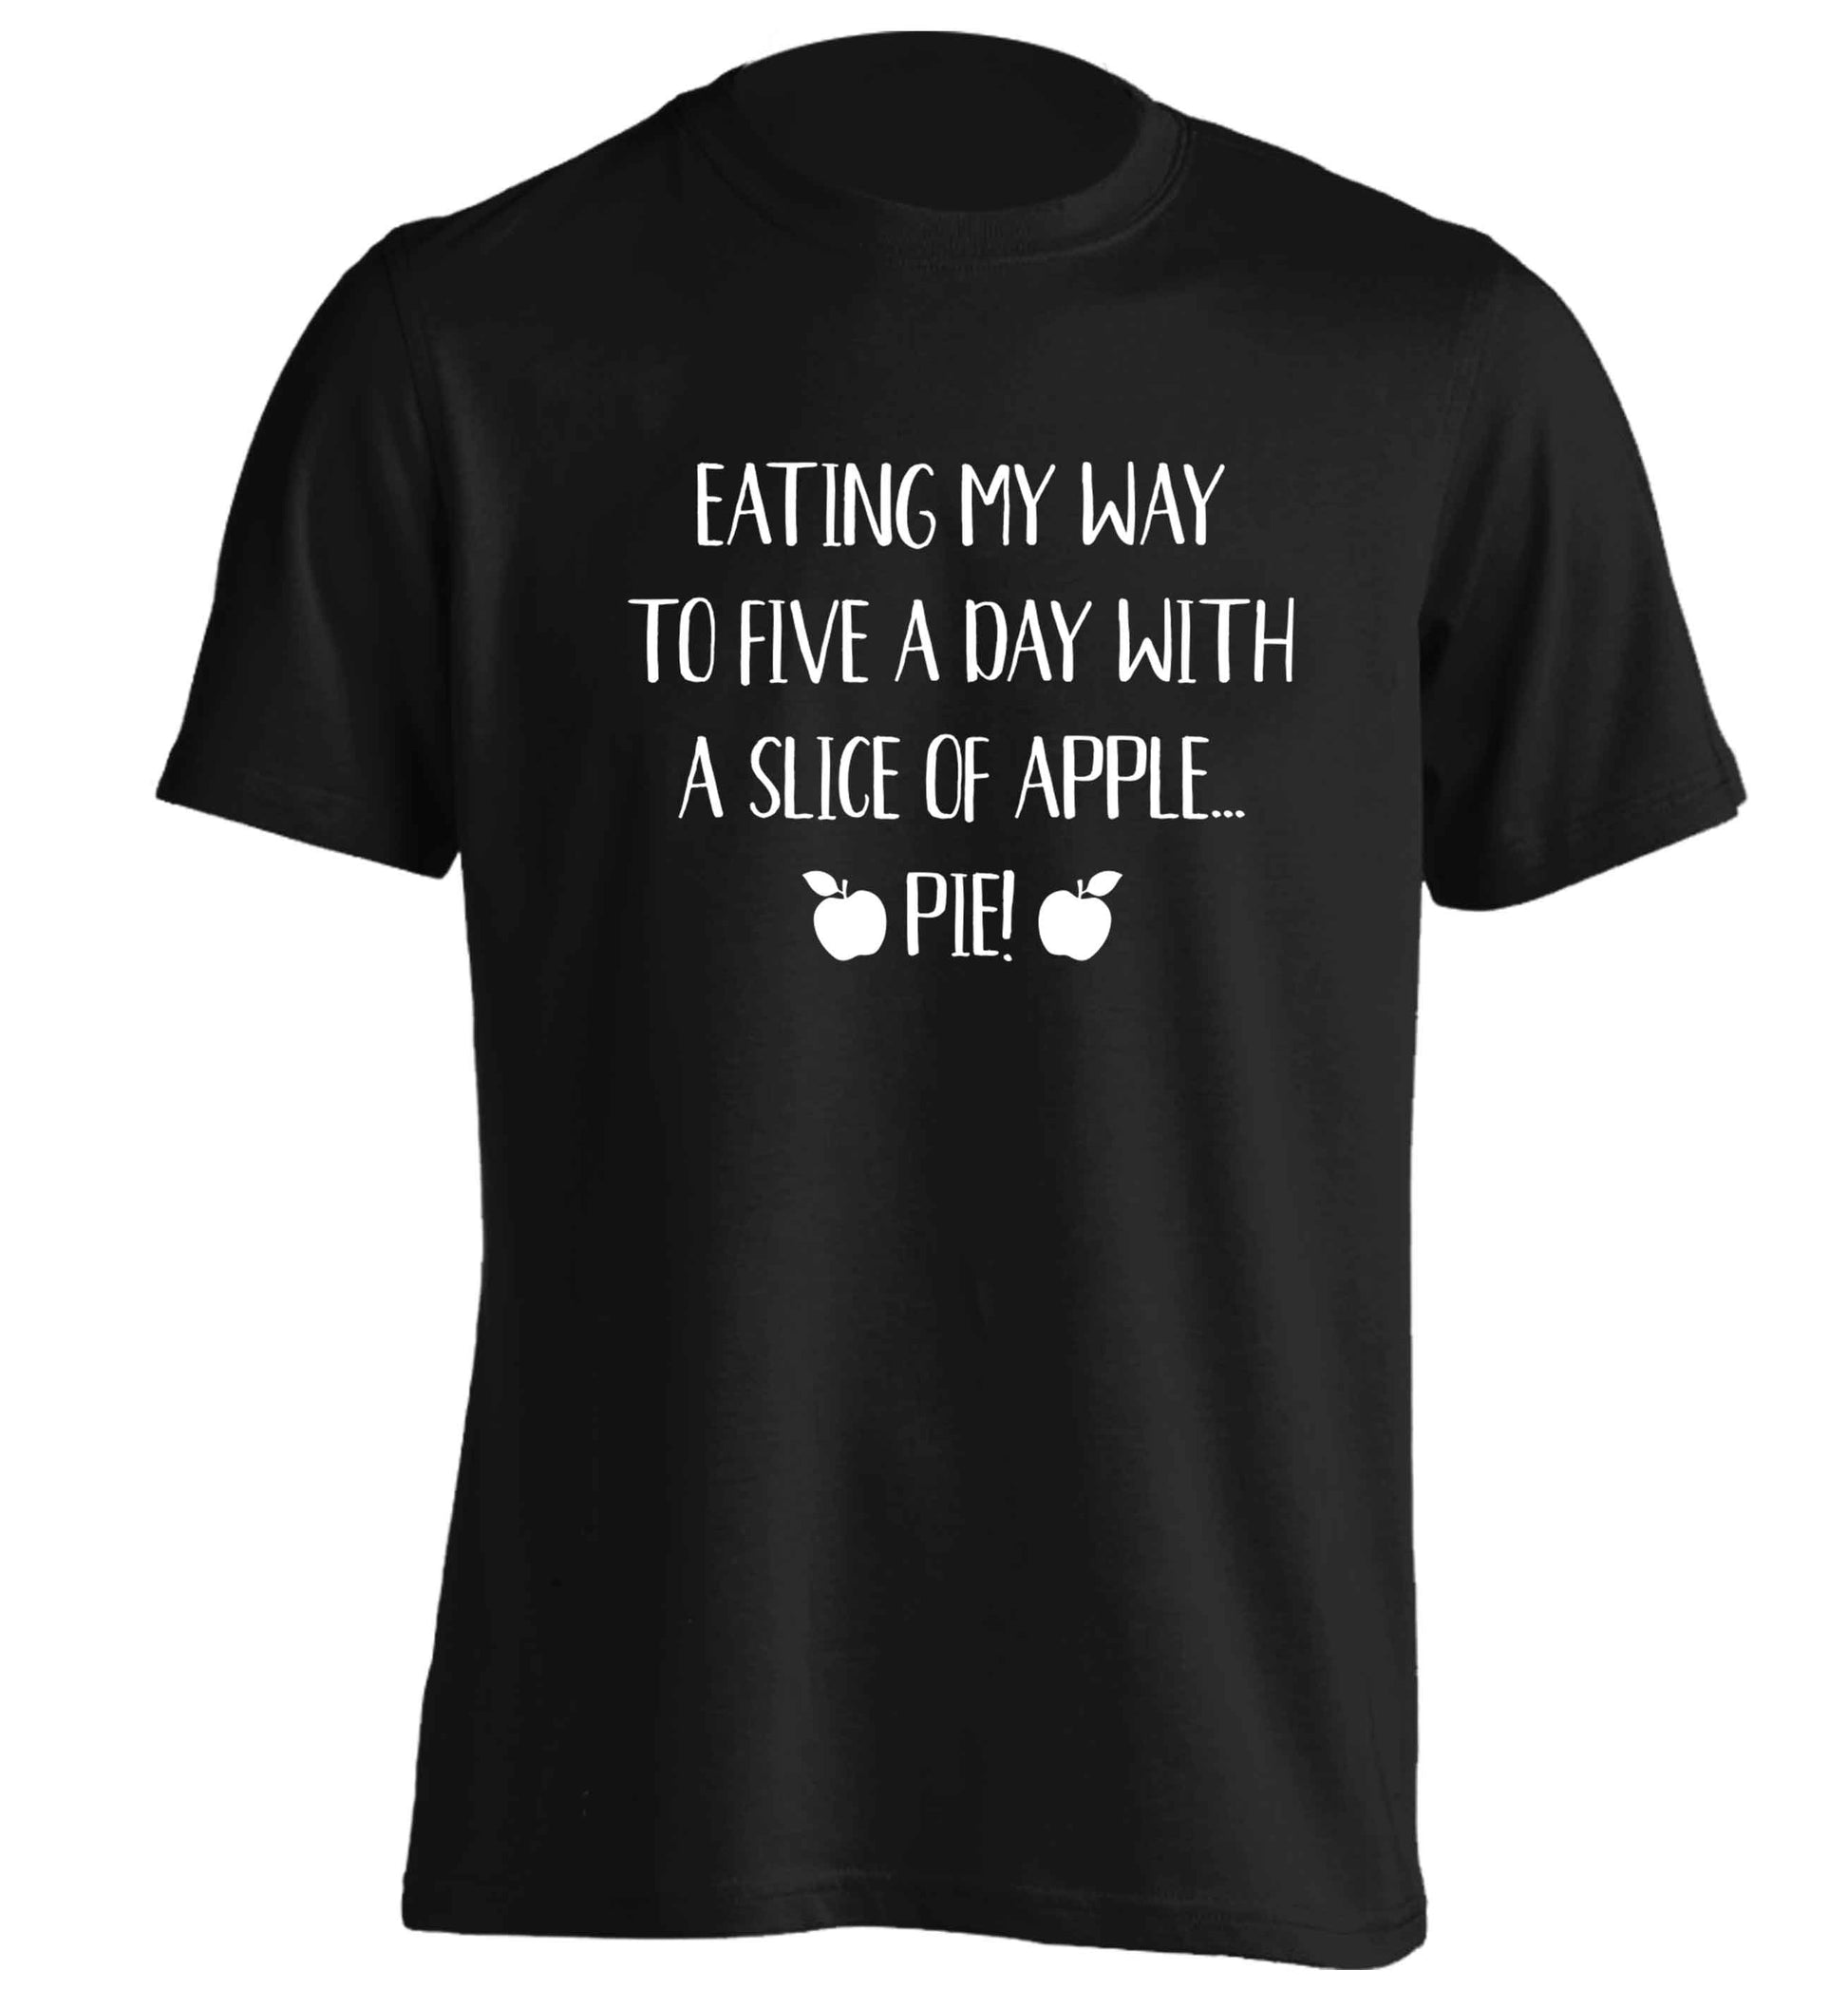 Eating my way to five a day with a slice of apple pie adults unisex black Tshirt 2XL